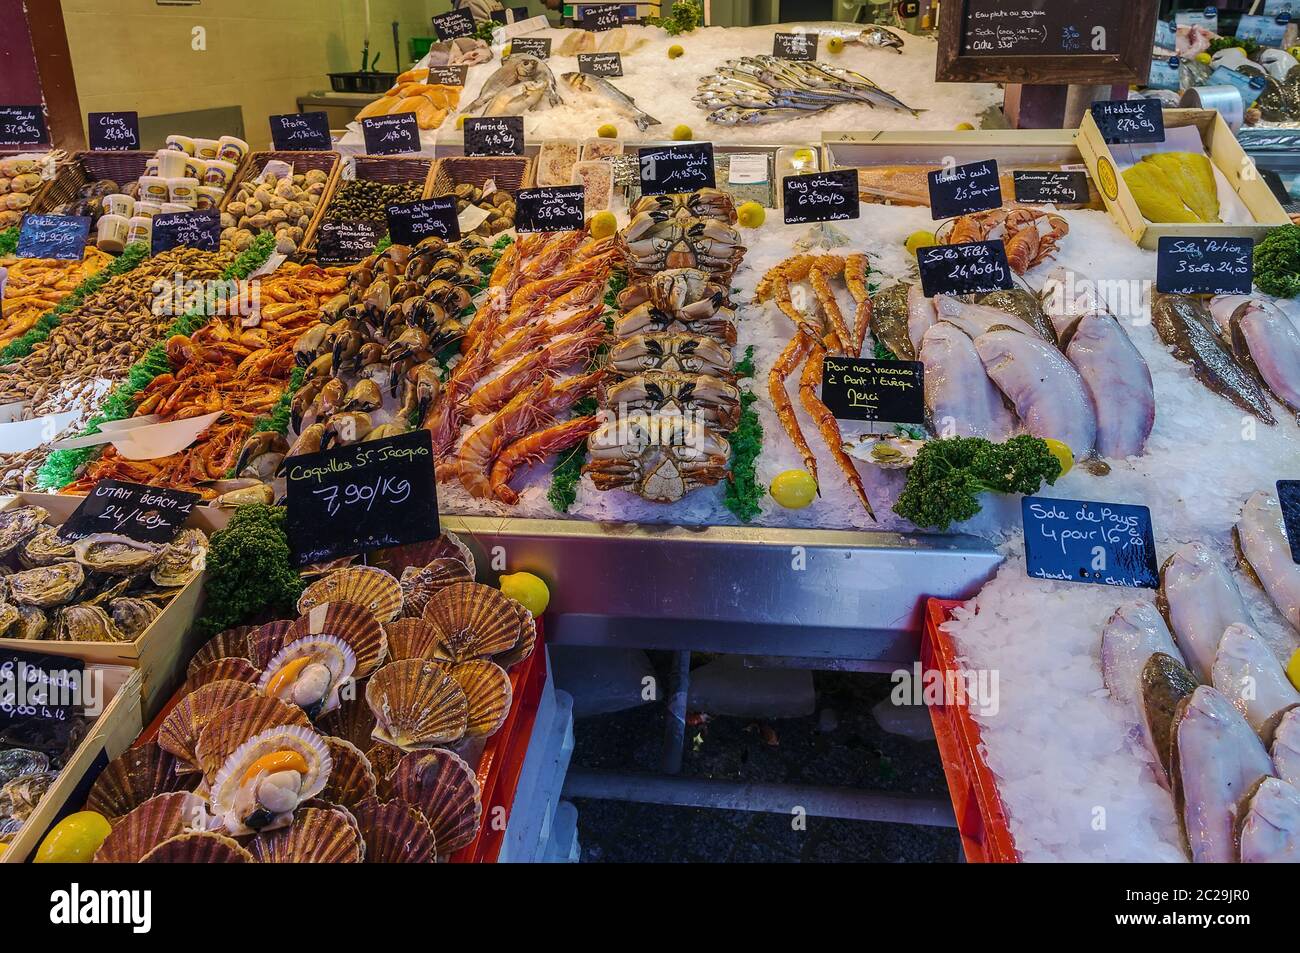 counter with seafood, Trouville-sur-mer, France Stock Photo